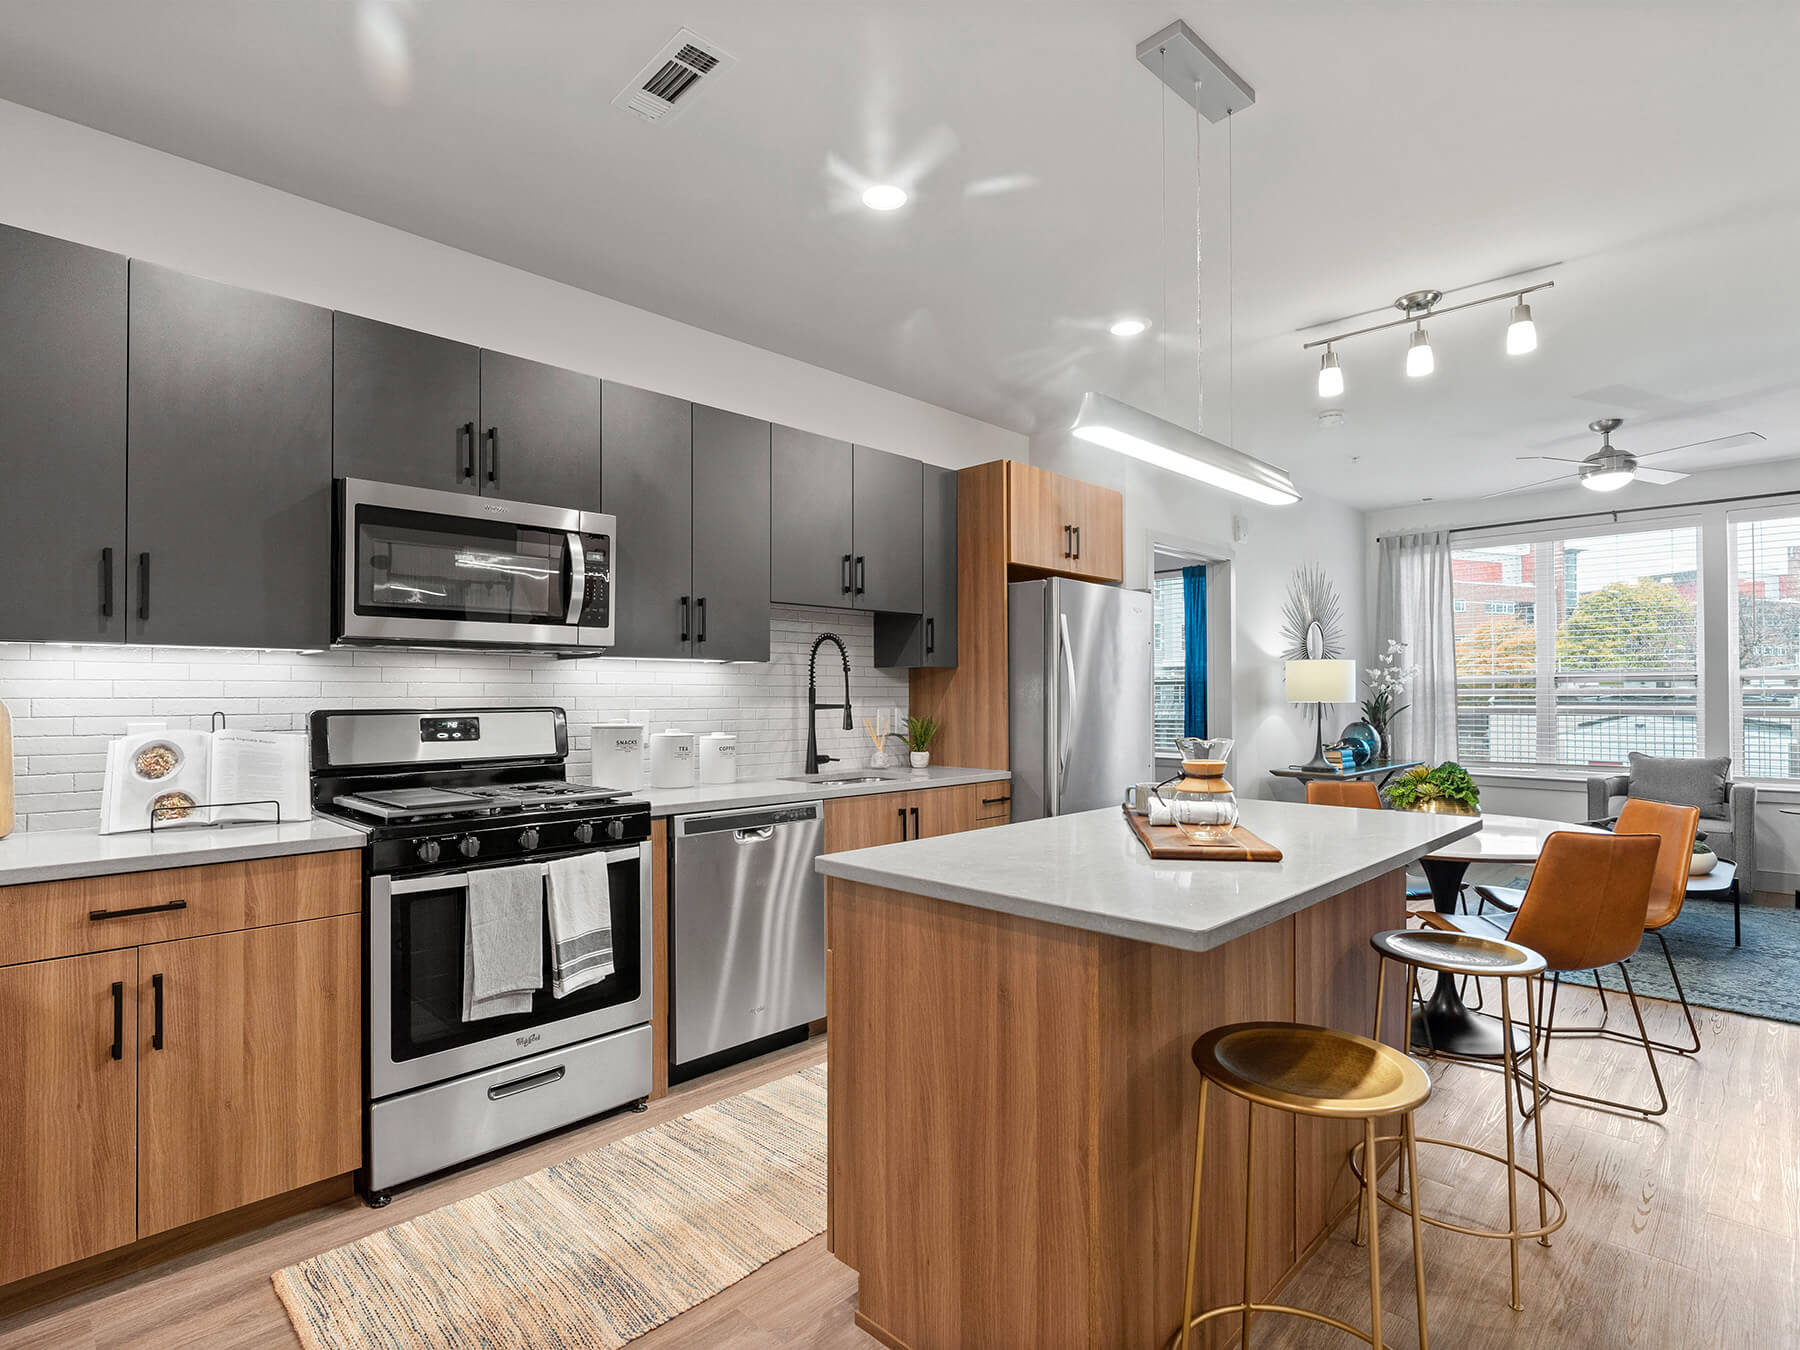 Modern kitchen with an island in the Vero Apartments in Chelsea, Massachusetts.